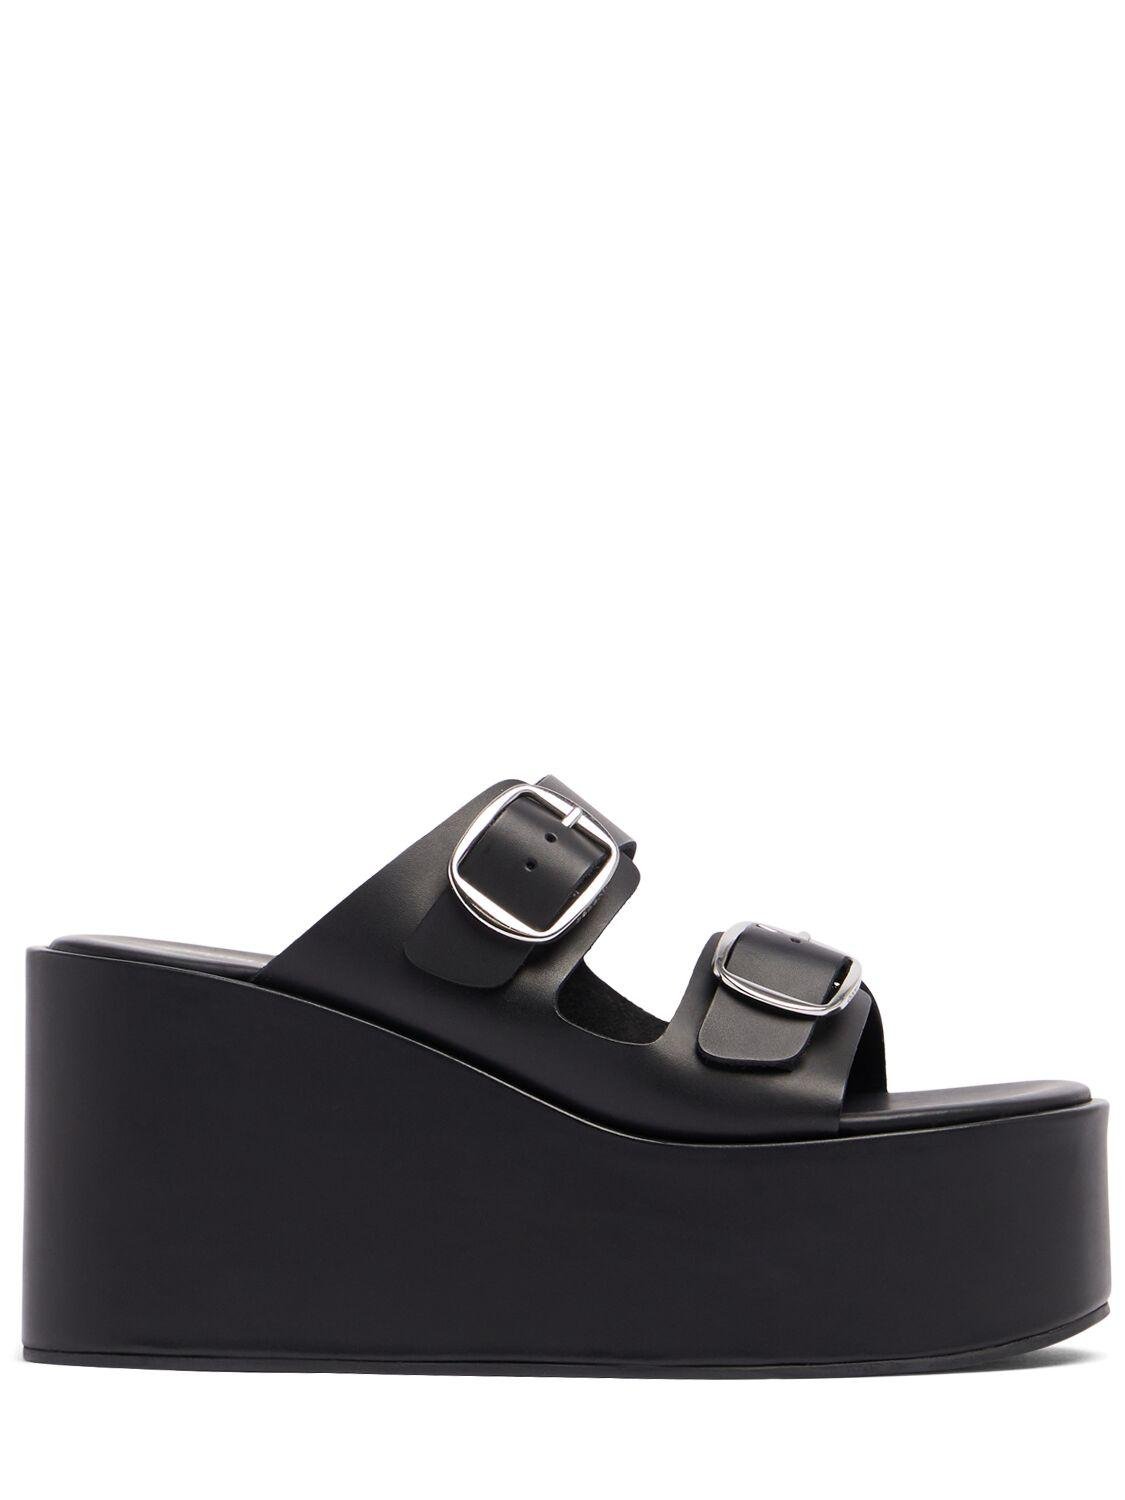 Buckle Wedges by COPERNI